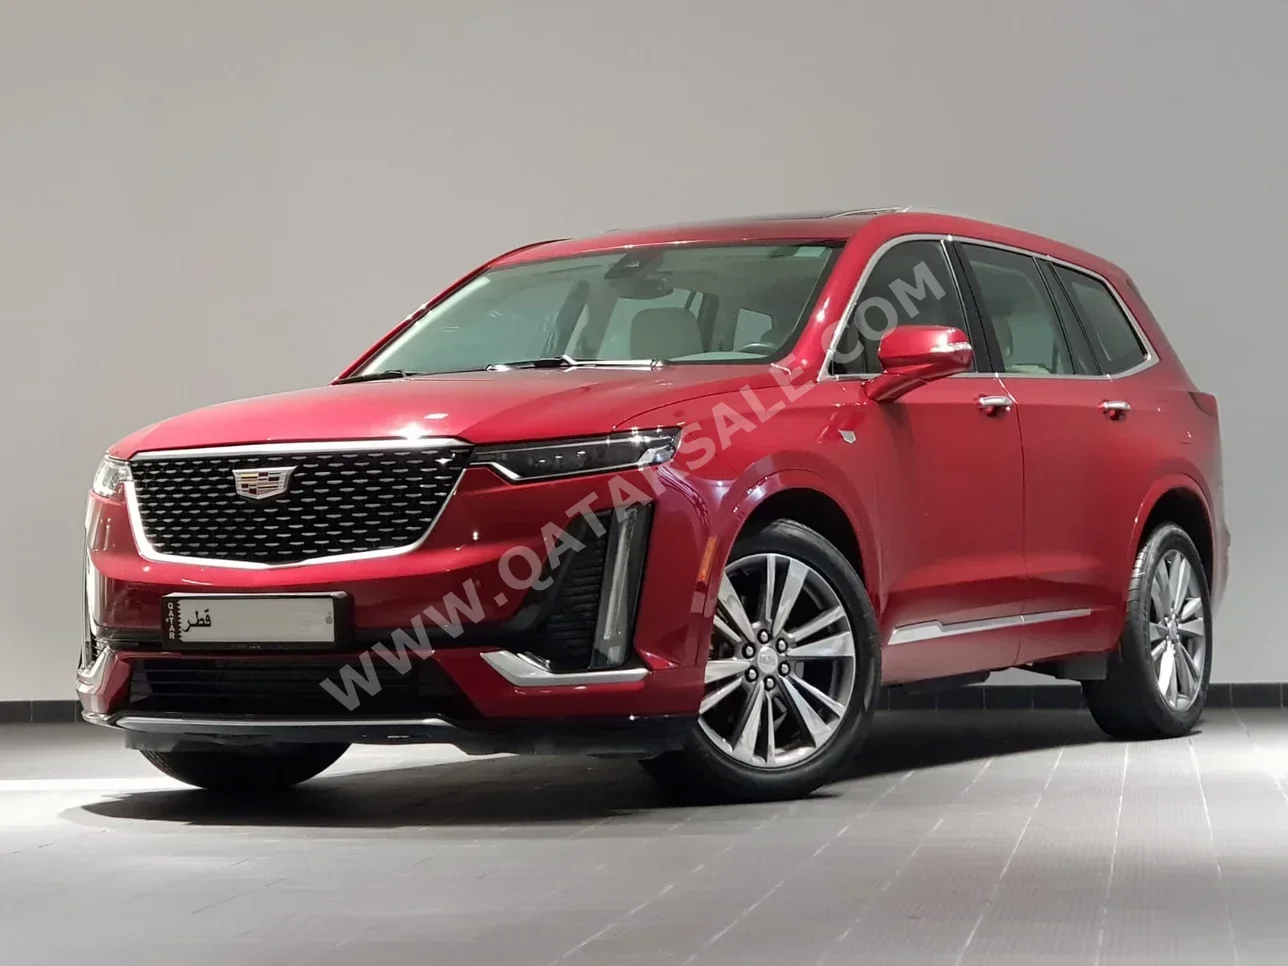 Cadillac  XT6  400 Premium Luxury  2020  Automatic  68,500 Km  6 Cylinder  Four Wheel Drive (4WD)  SUV  Red